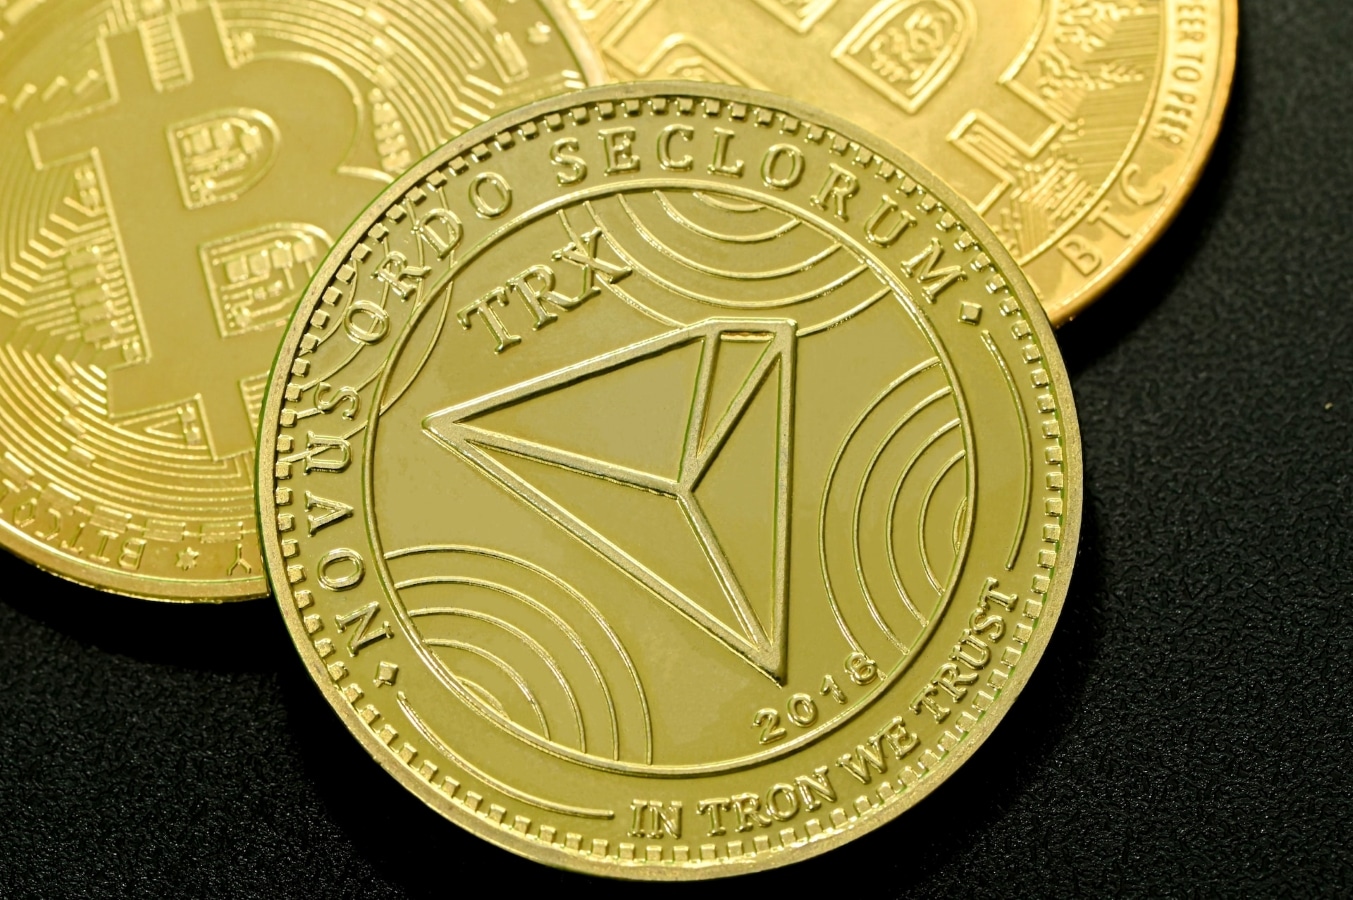 Tron enthusiasts could witness uncertainty as TRX sends out these mixed signals